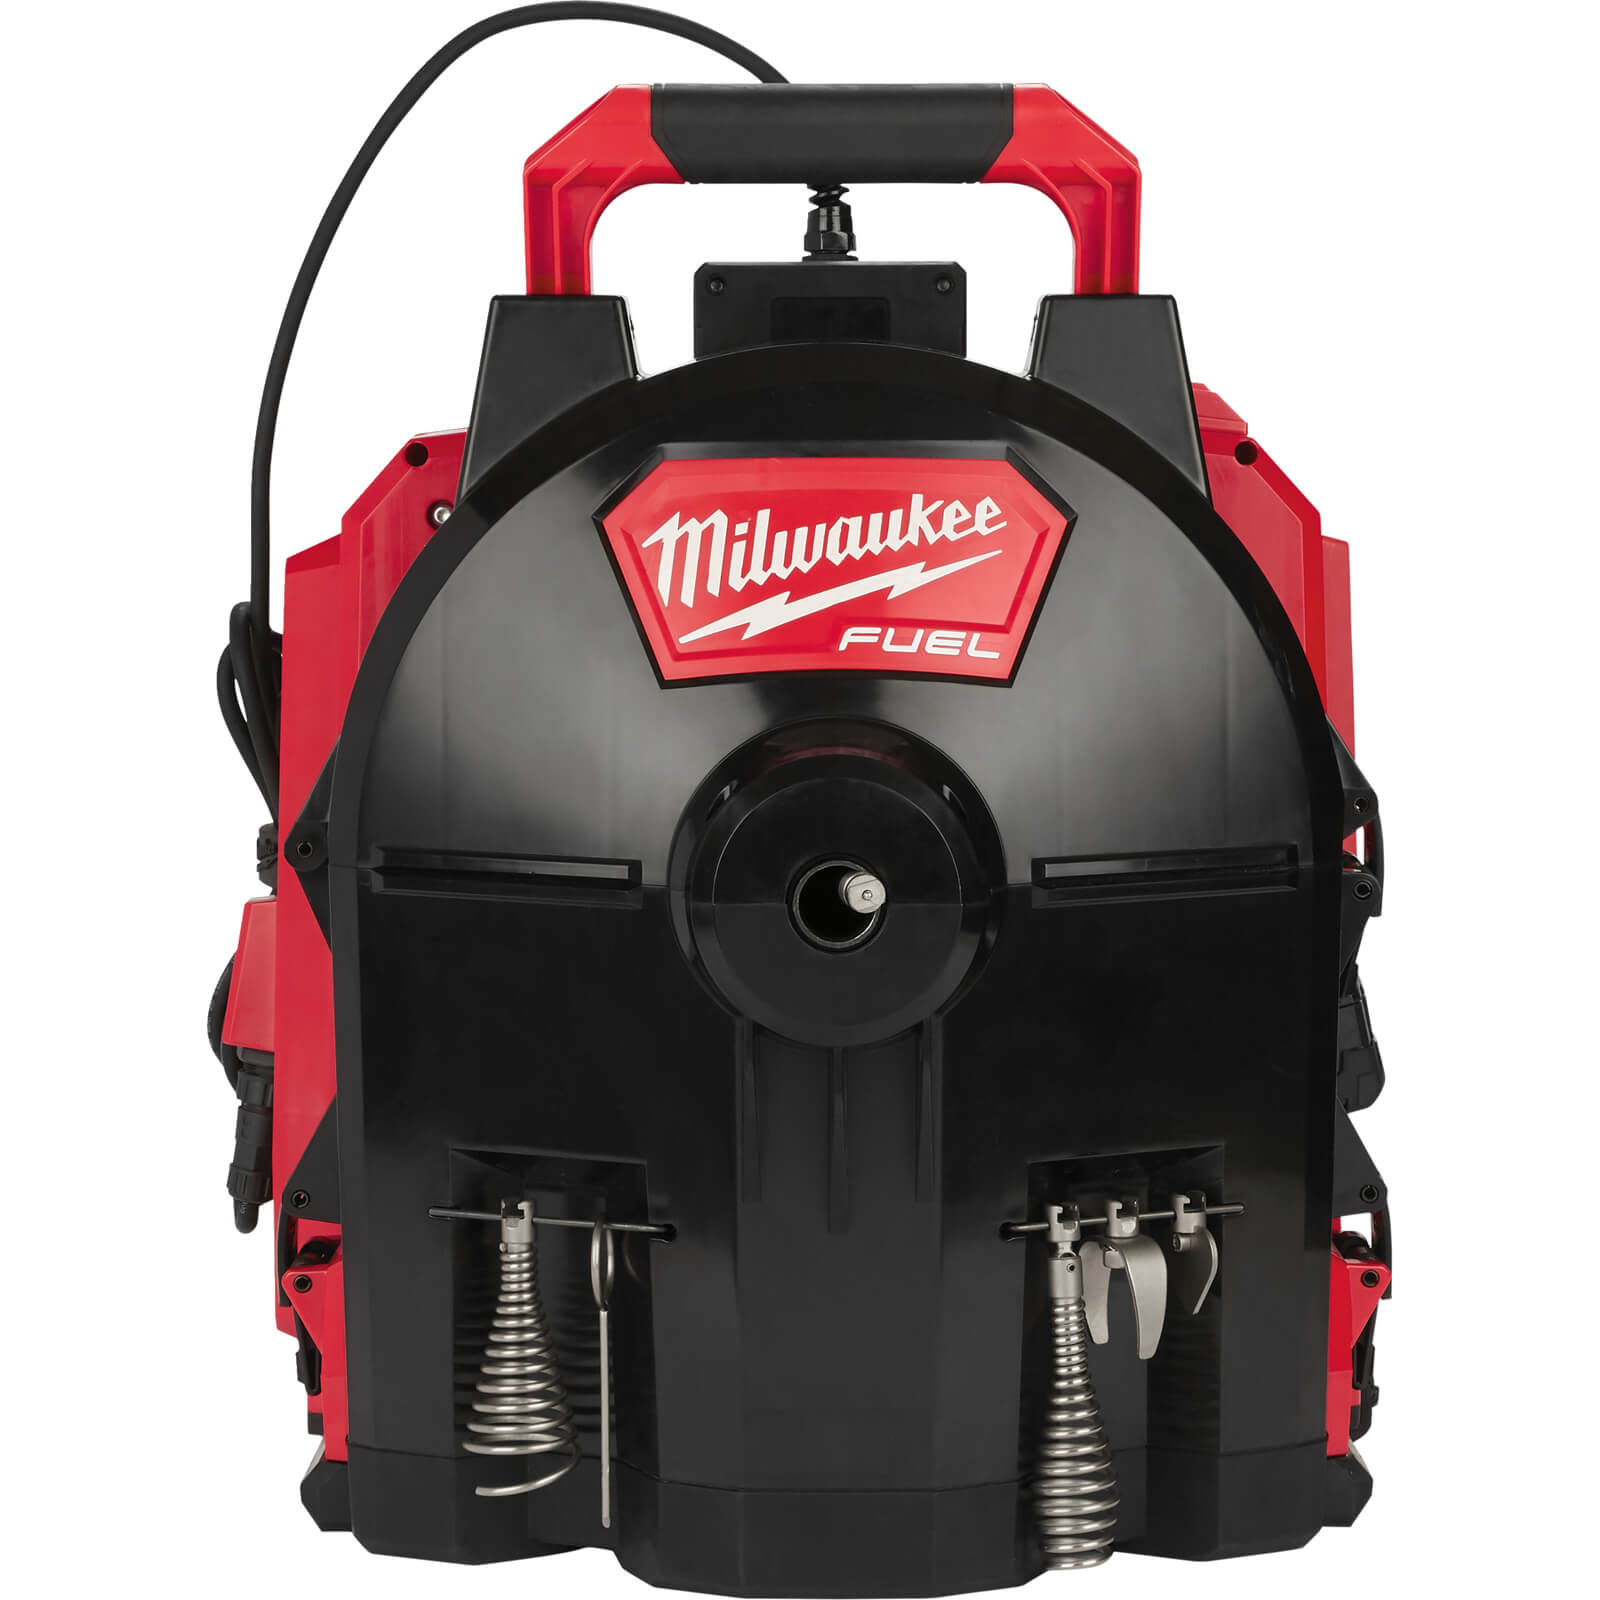 Image of Milwaukee M18 FFSDC10 Fuel 18v Cordless Brushless Free Standing Drain Cleaner No Batteries No Charger No Case